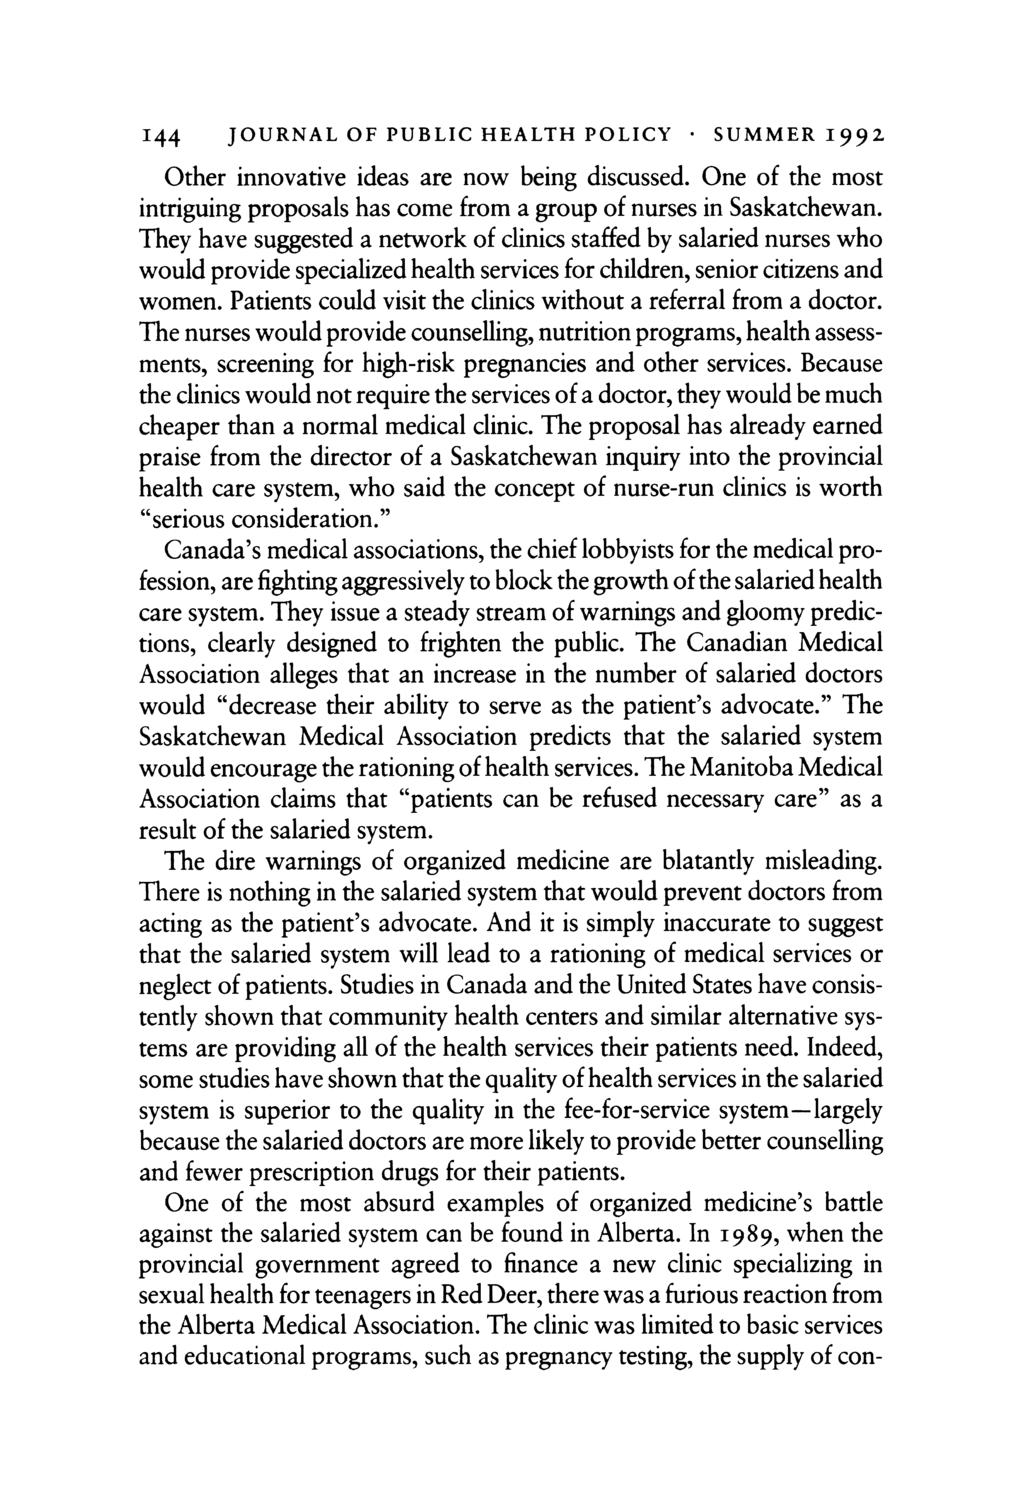 144 JOURNAL OF PUBLIC HEALTH POLICY * SUMMER 1992 Other innovative ideas are now being discussed. One of the most intriguing proposals has come from a group of nurses in Saskatchewan.